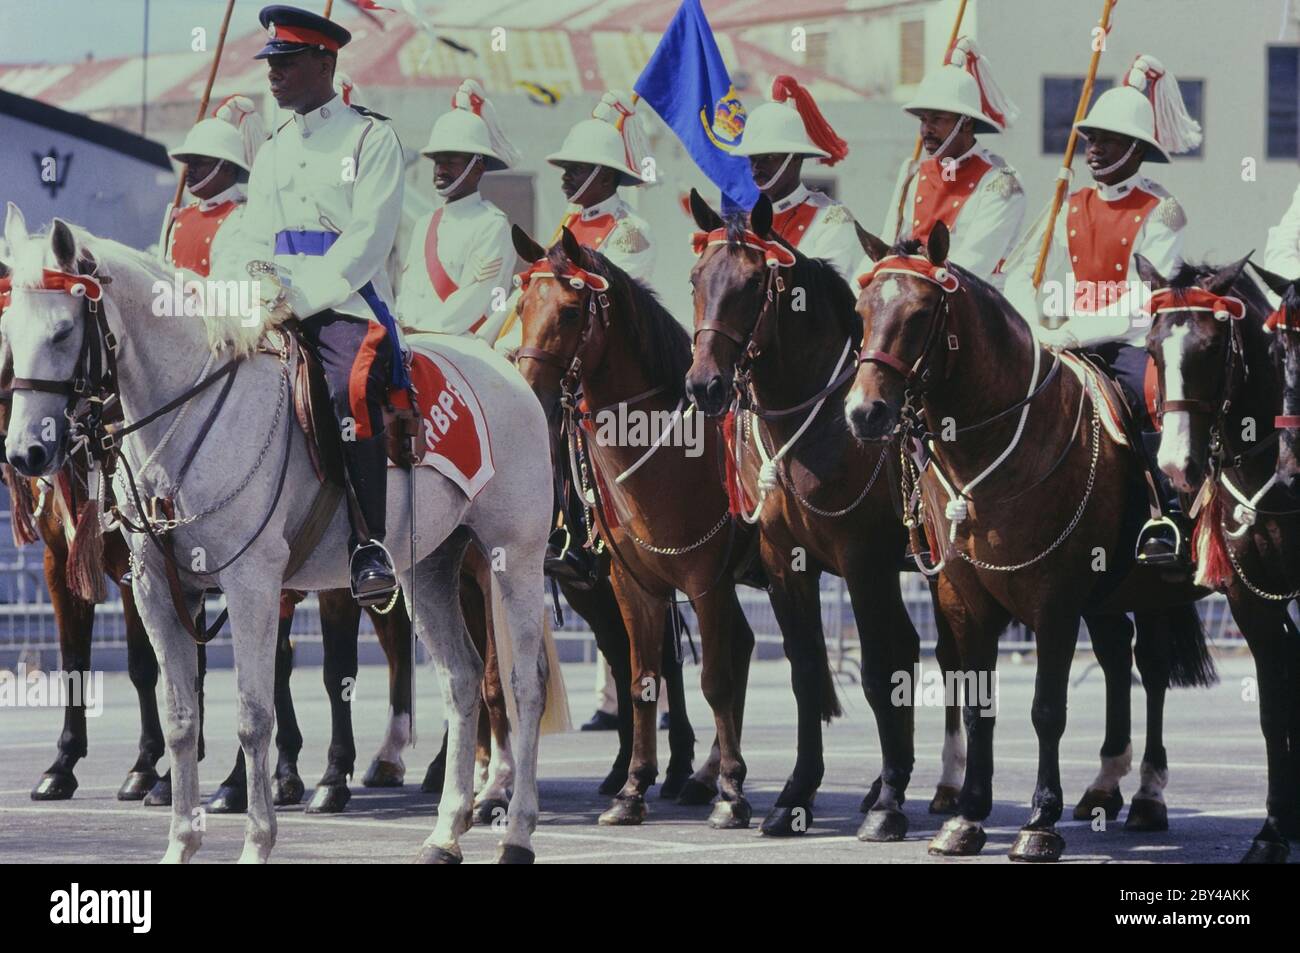 Mounted branch of the Royal Barbados Police Force, attend the 350th anniversary of the Barbados Parliament, Bridgetown, Barbados, Caribbean Stock Photo